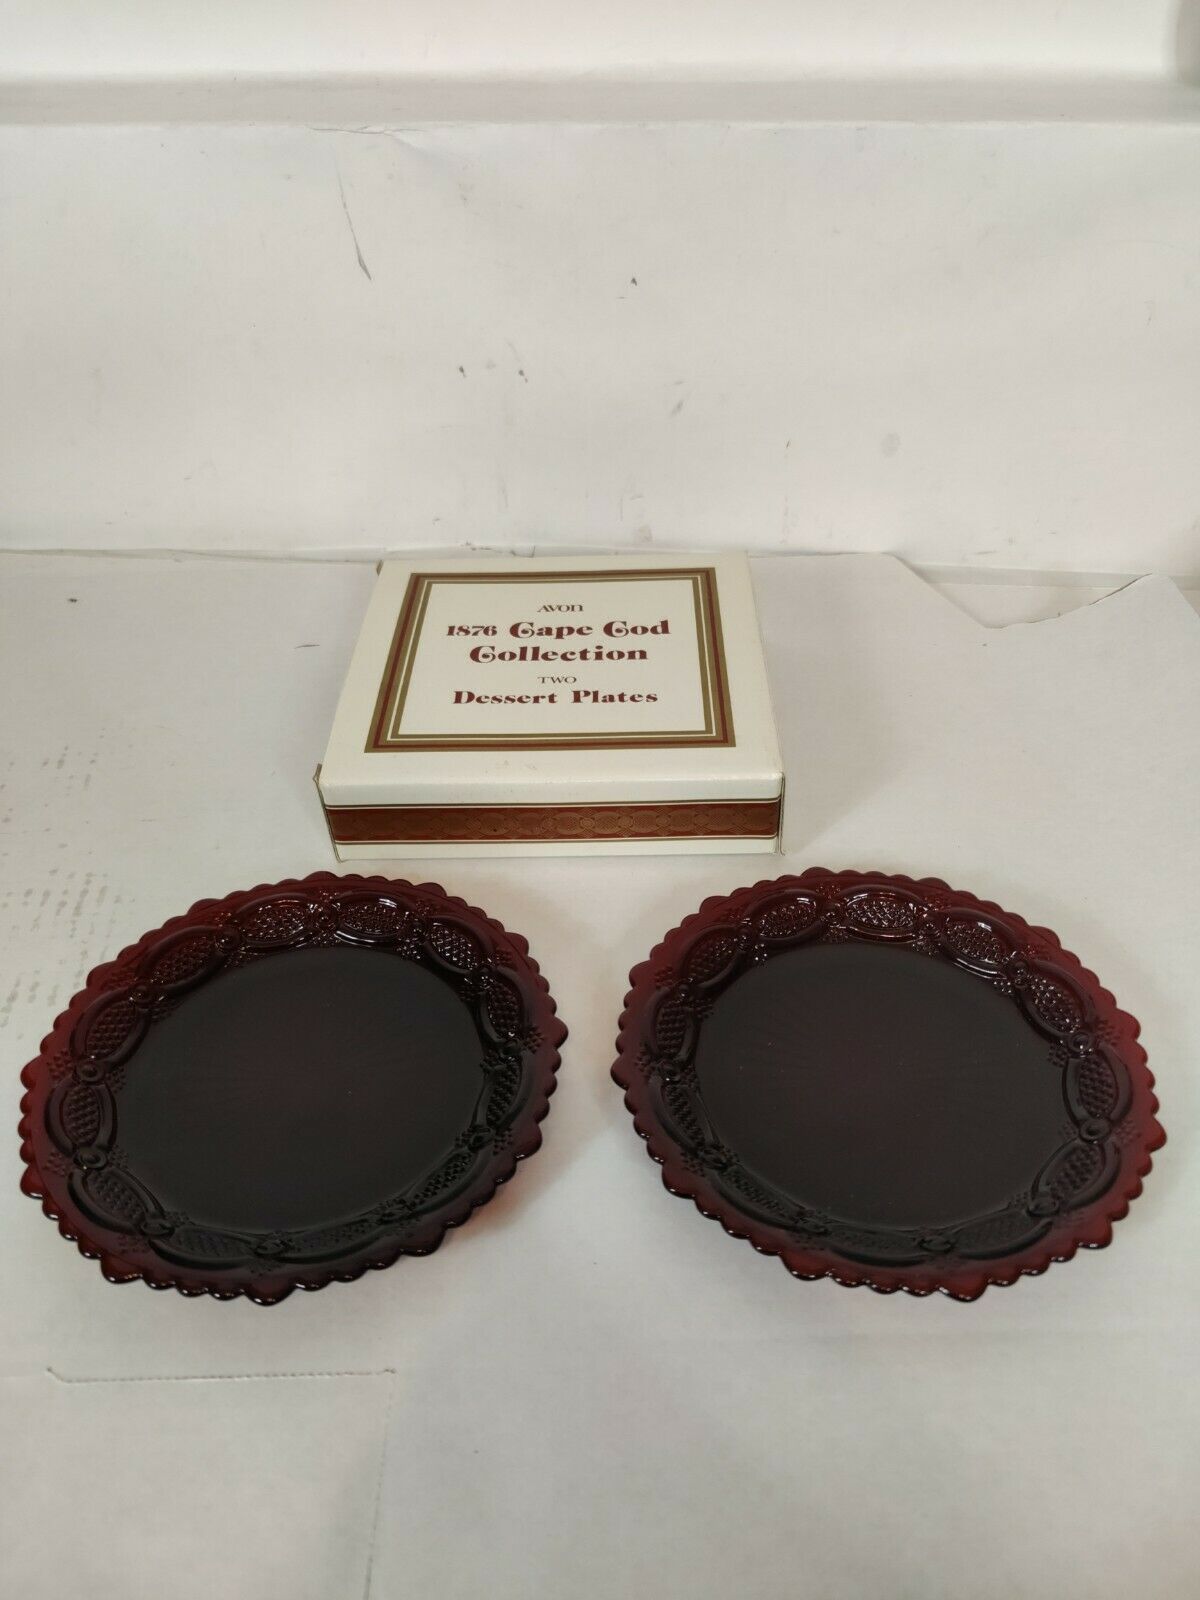 Avon 1876 Cape Cod Collection Ruby Red Desert Plates - $12.95